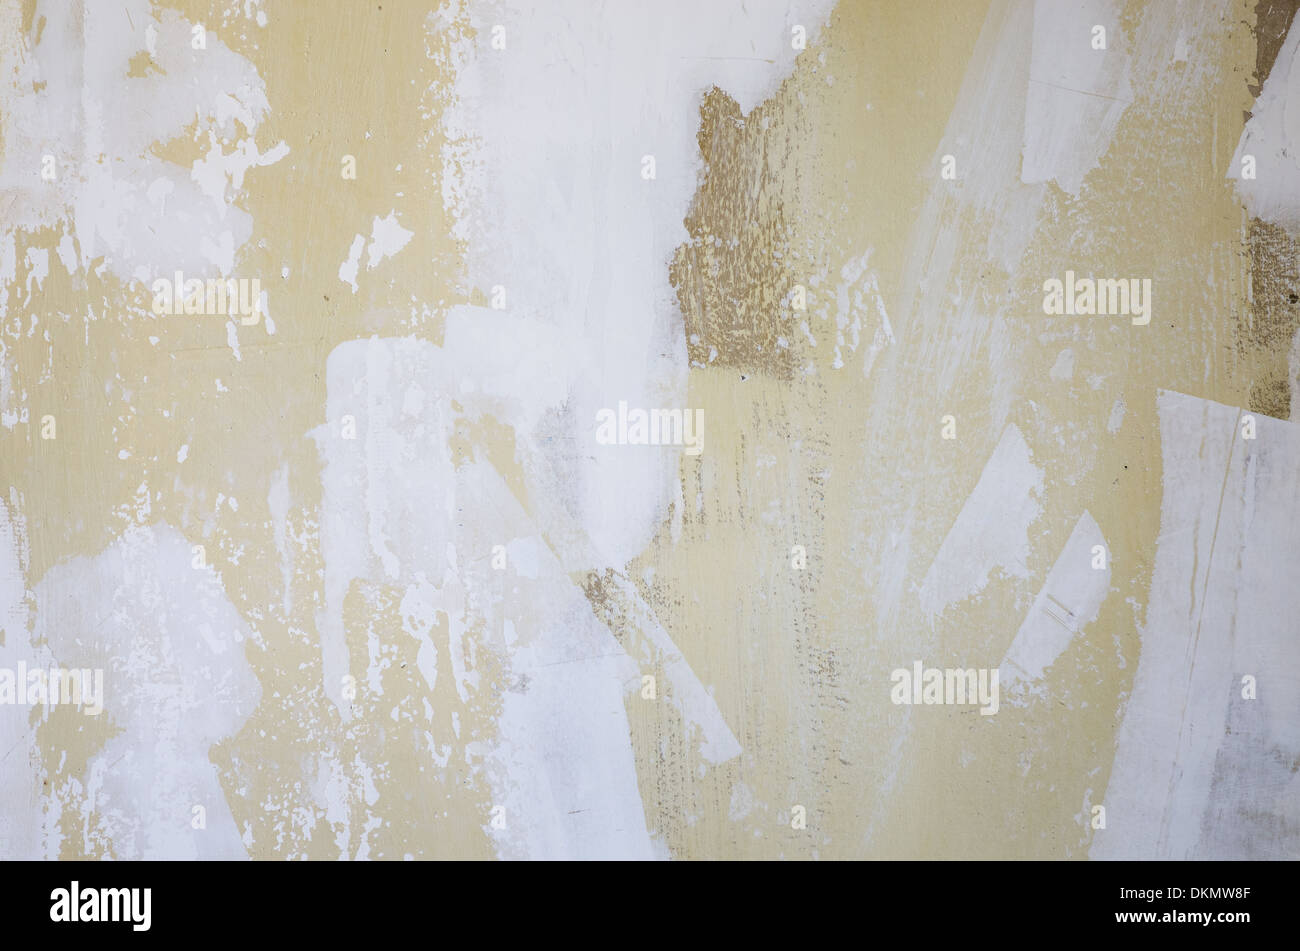 old grunge wall background with flaking and spackled light and dark sections Stock Photo